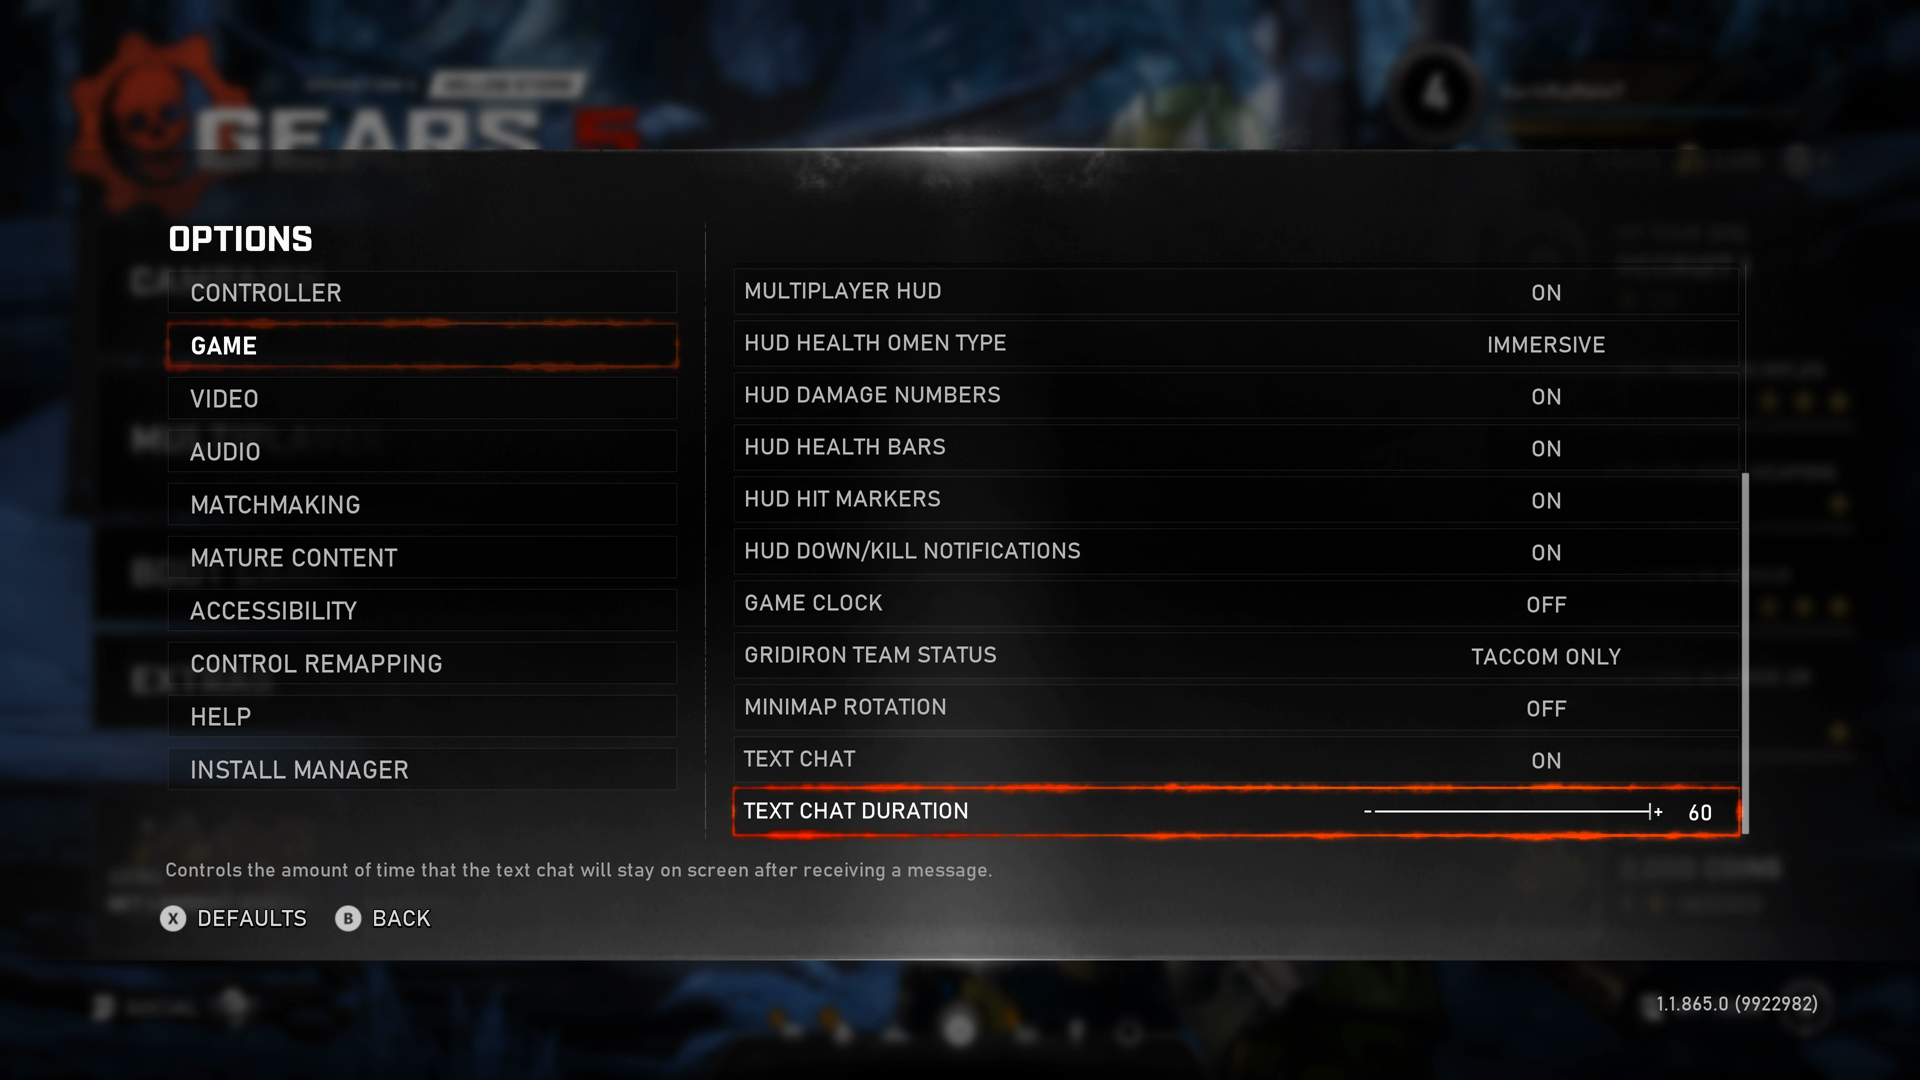 A screenshot from Gears 5, showing the "Options" menu. The "Game" tab is selected. The "Text Chat Duration" slider is shown and has a value of 60 seconds.